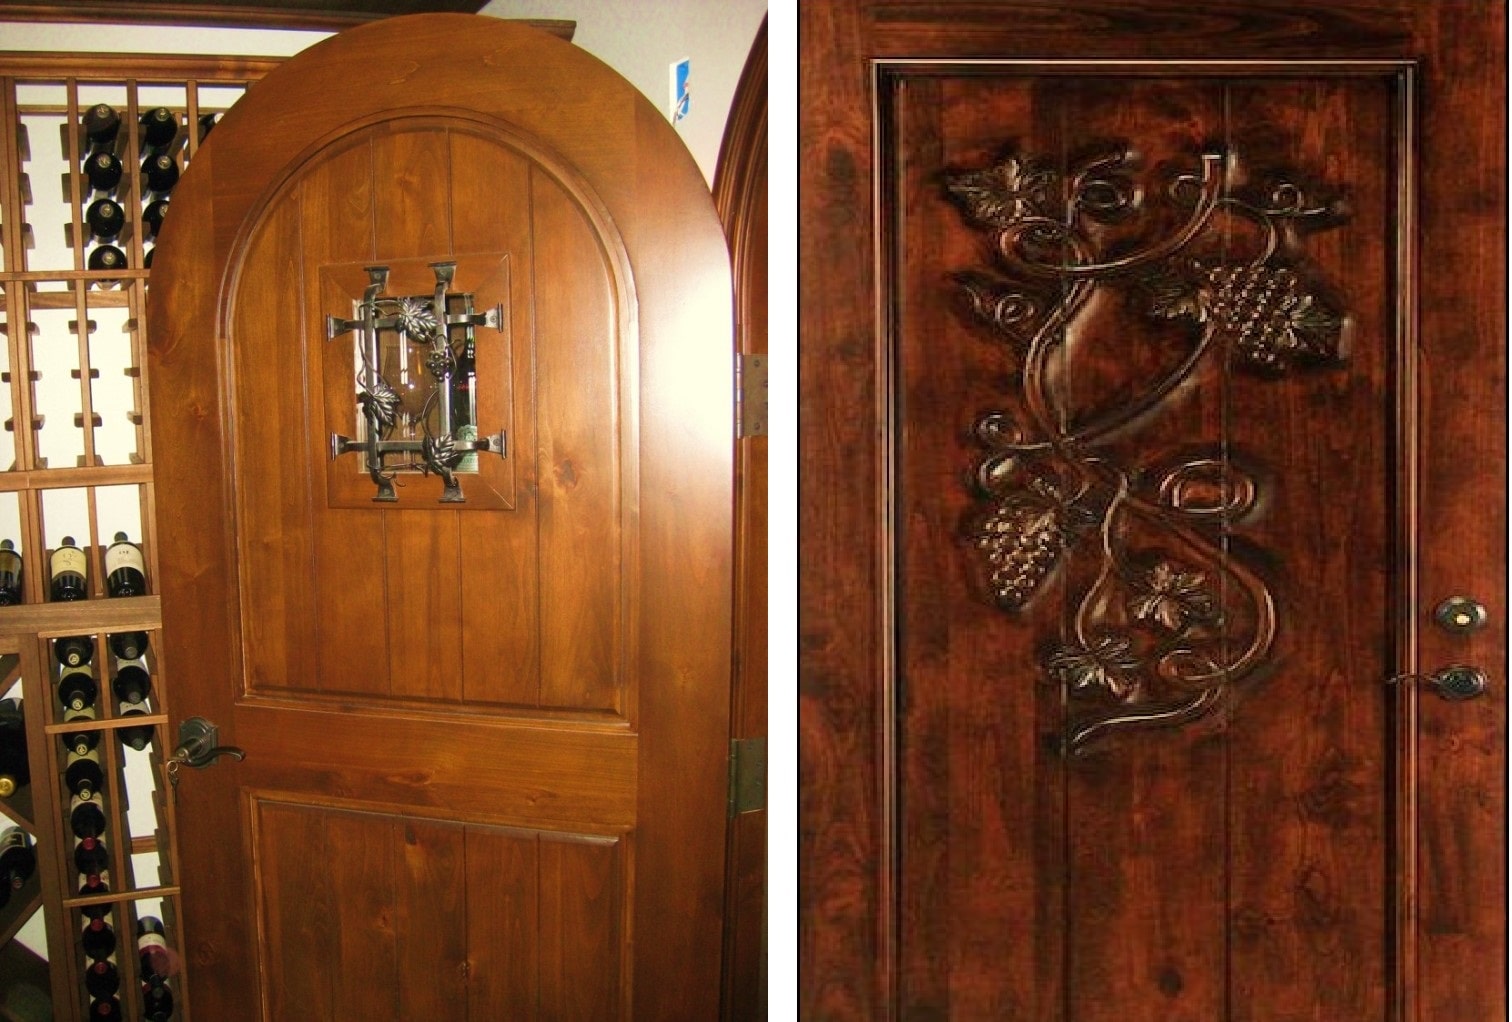 Arched wooden wine room doors with intricate design details. Durable wooden wine room doors.